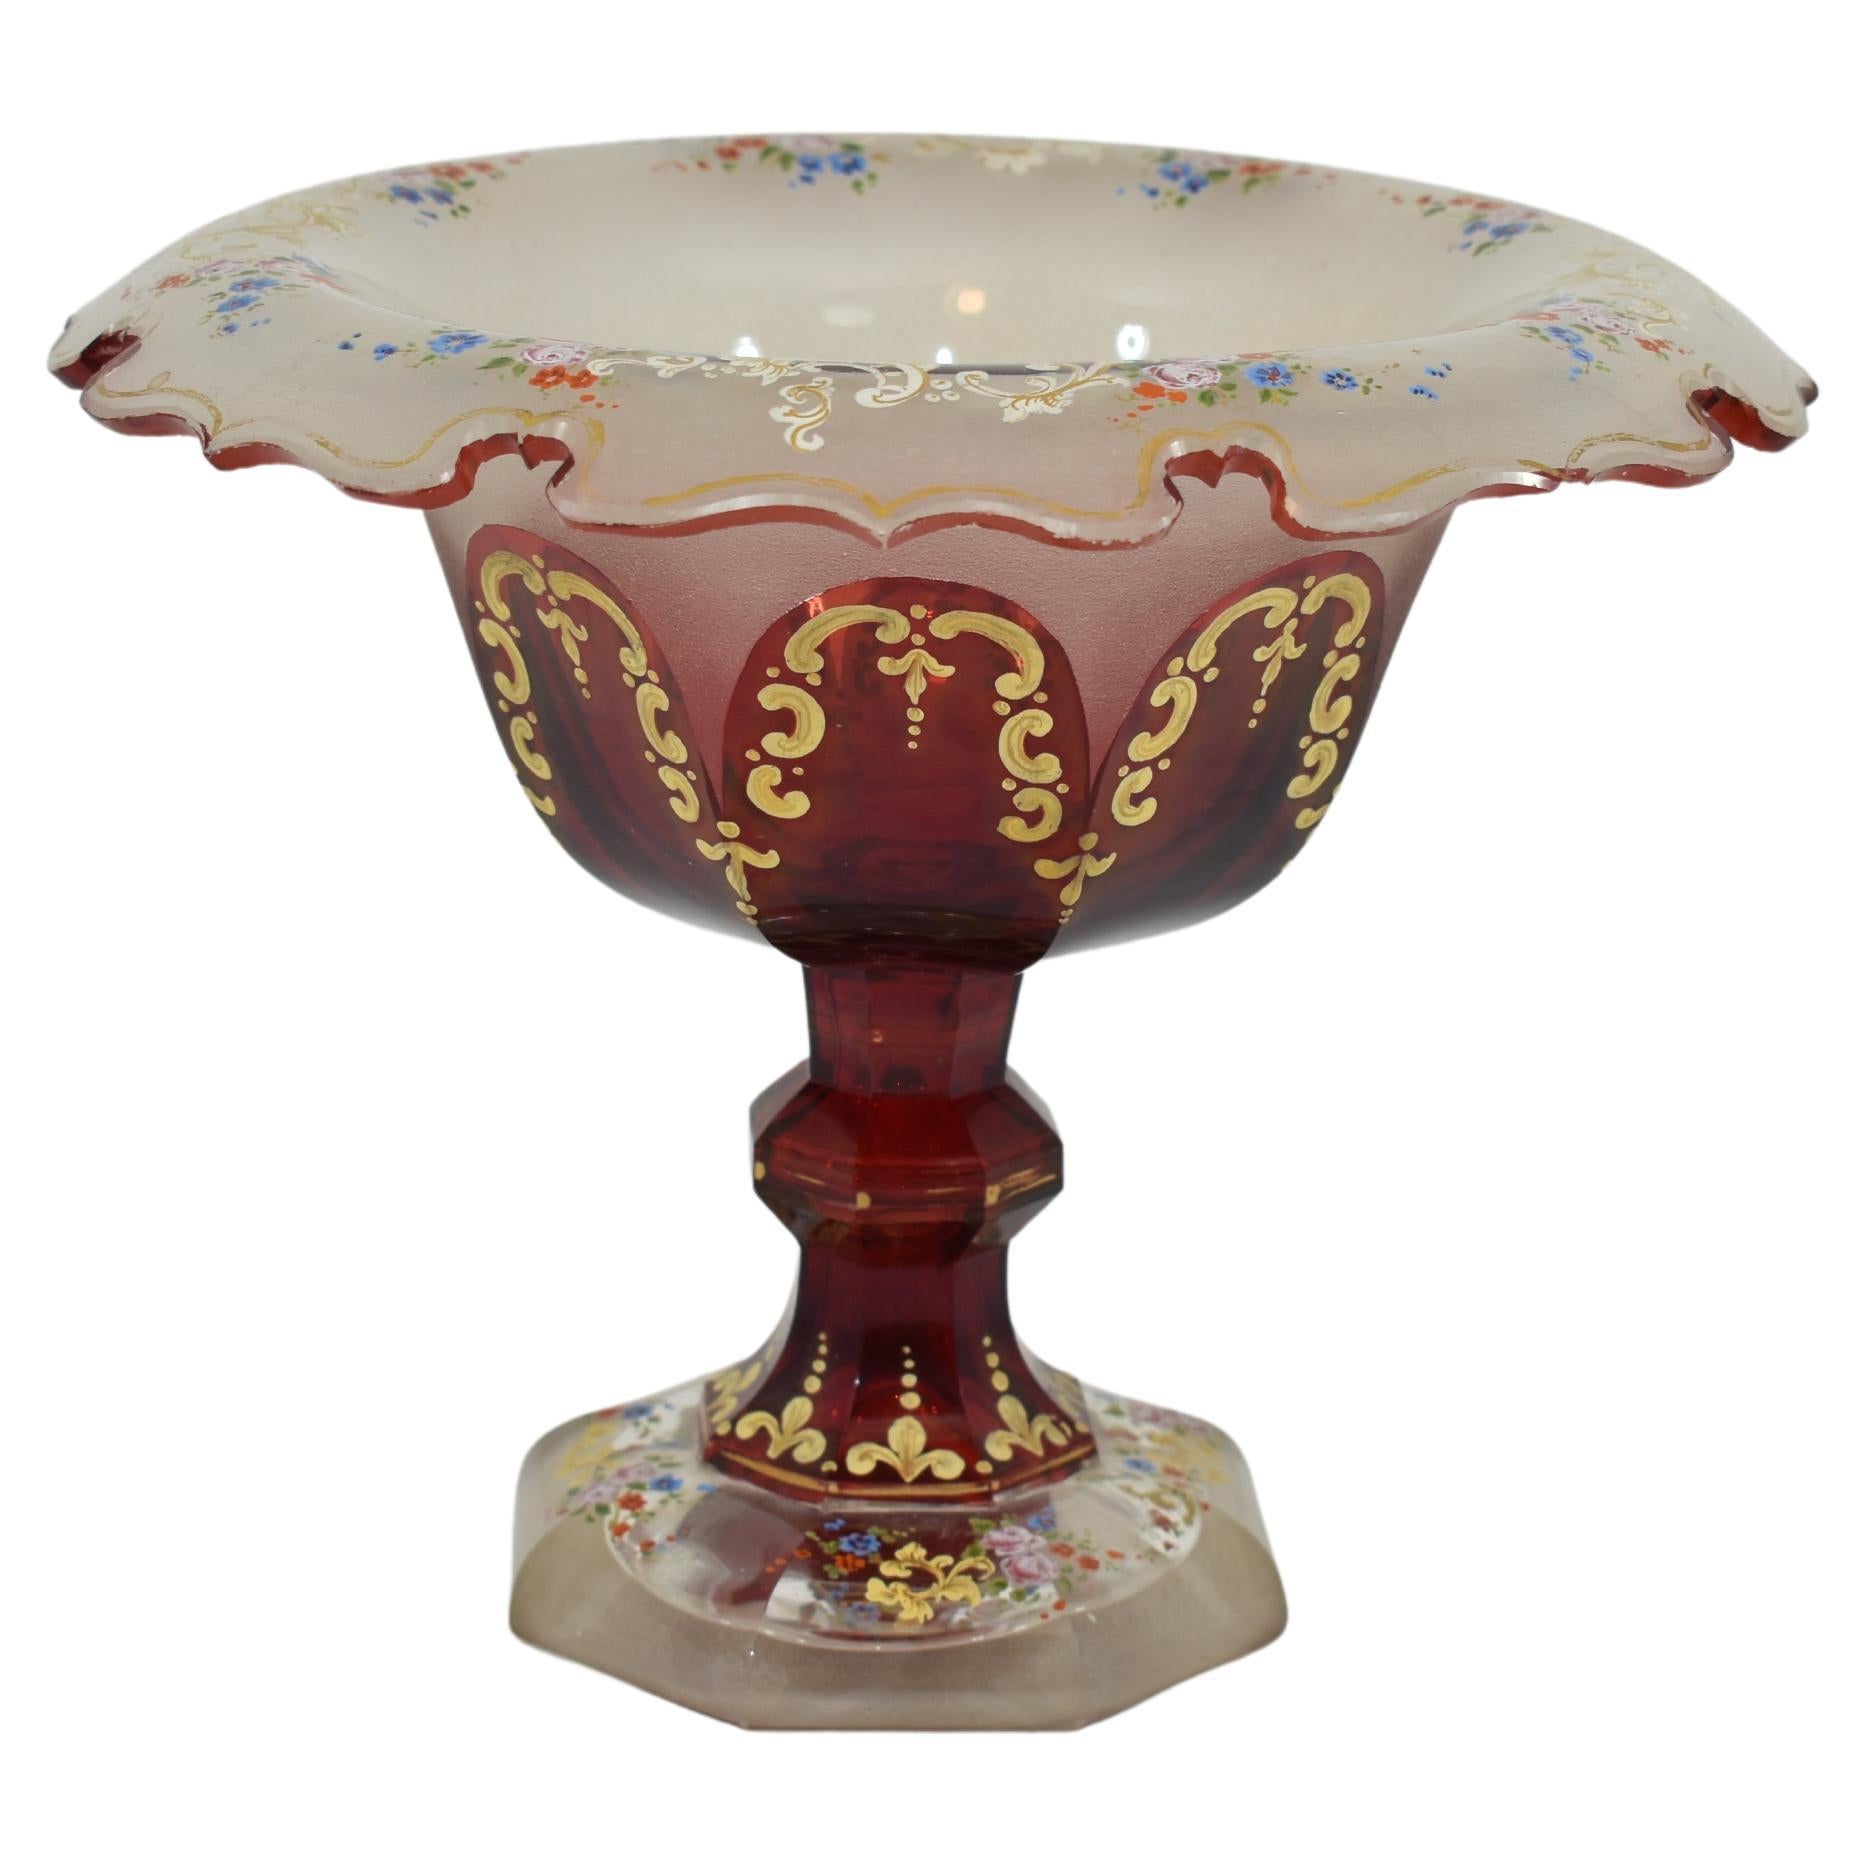 Tazza bowl made of opaque and ruby red glass.
Fine quality of the 19th century glass manufacture.
Hand-painted with gilded enamel decoration featuring scrolls and flowers
turned-out scalloped rim
Bohemia, 19th century.